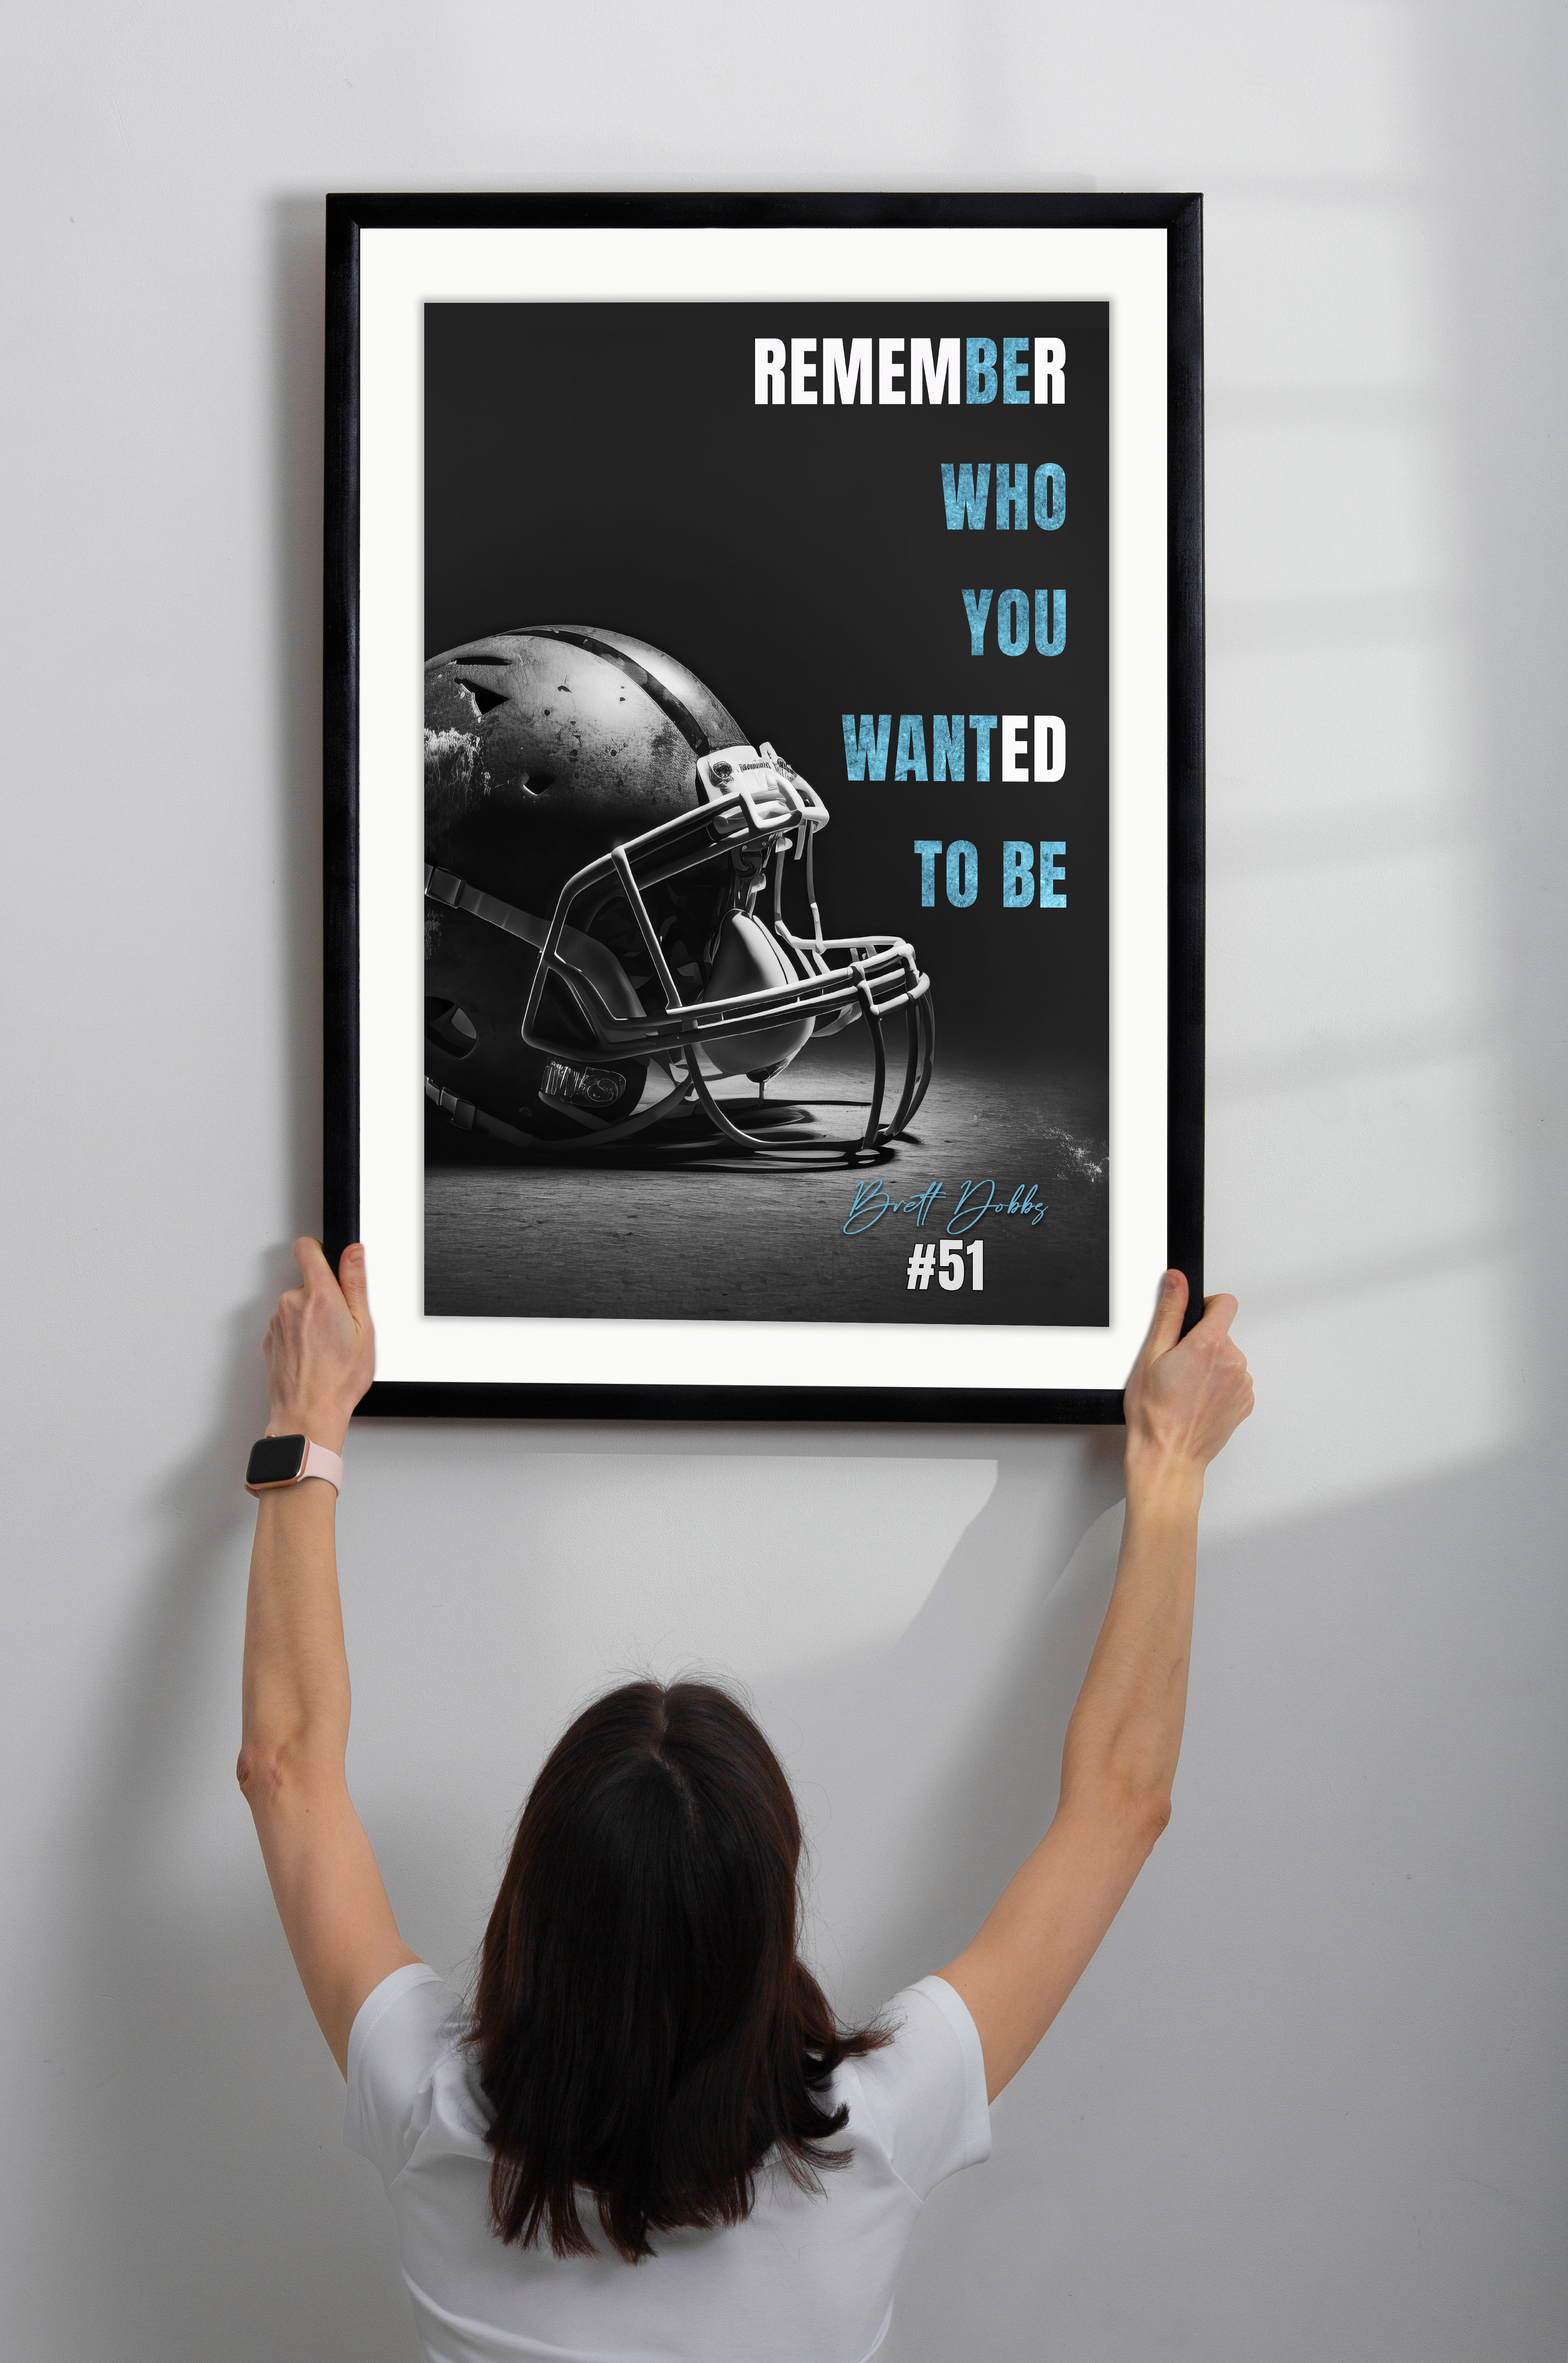 Motivational Quotes For Athletes | Inspiring Sports Quotes | Wall-Art | Football